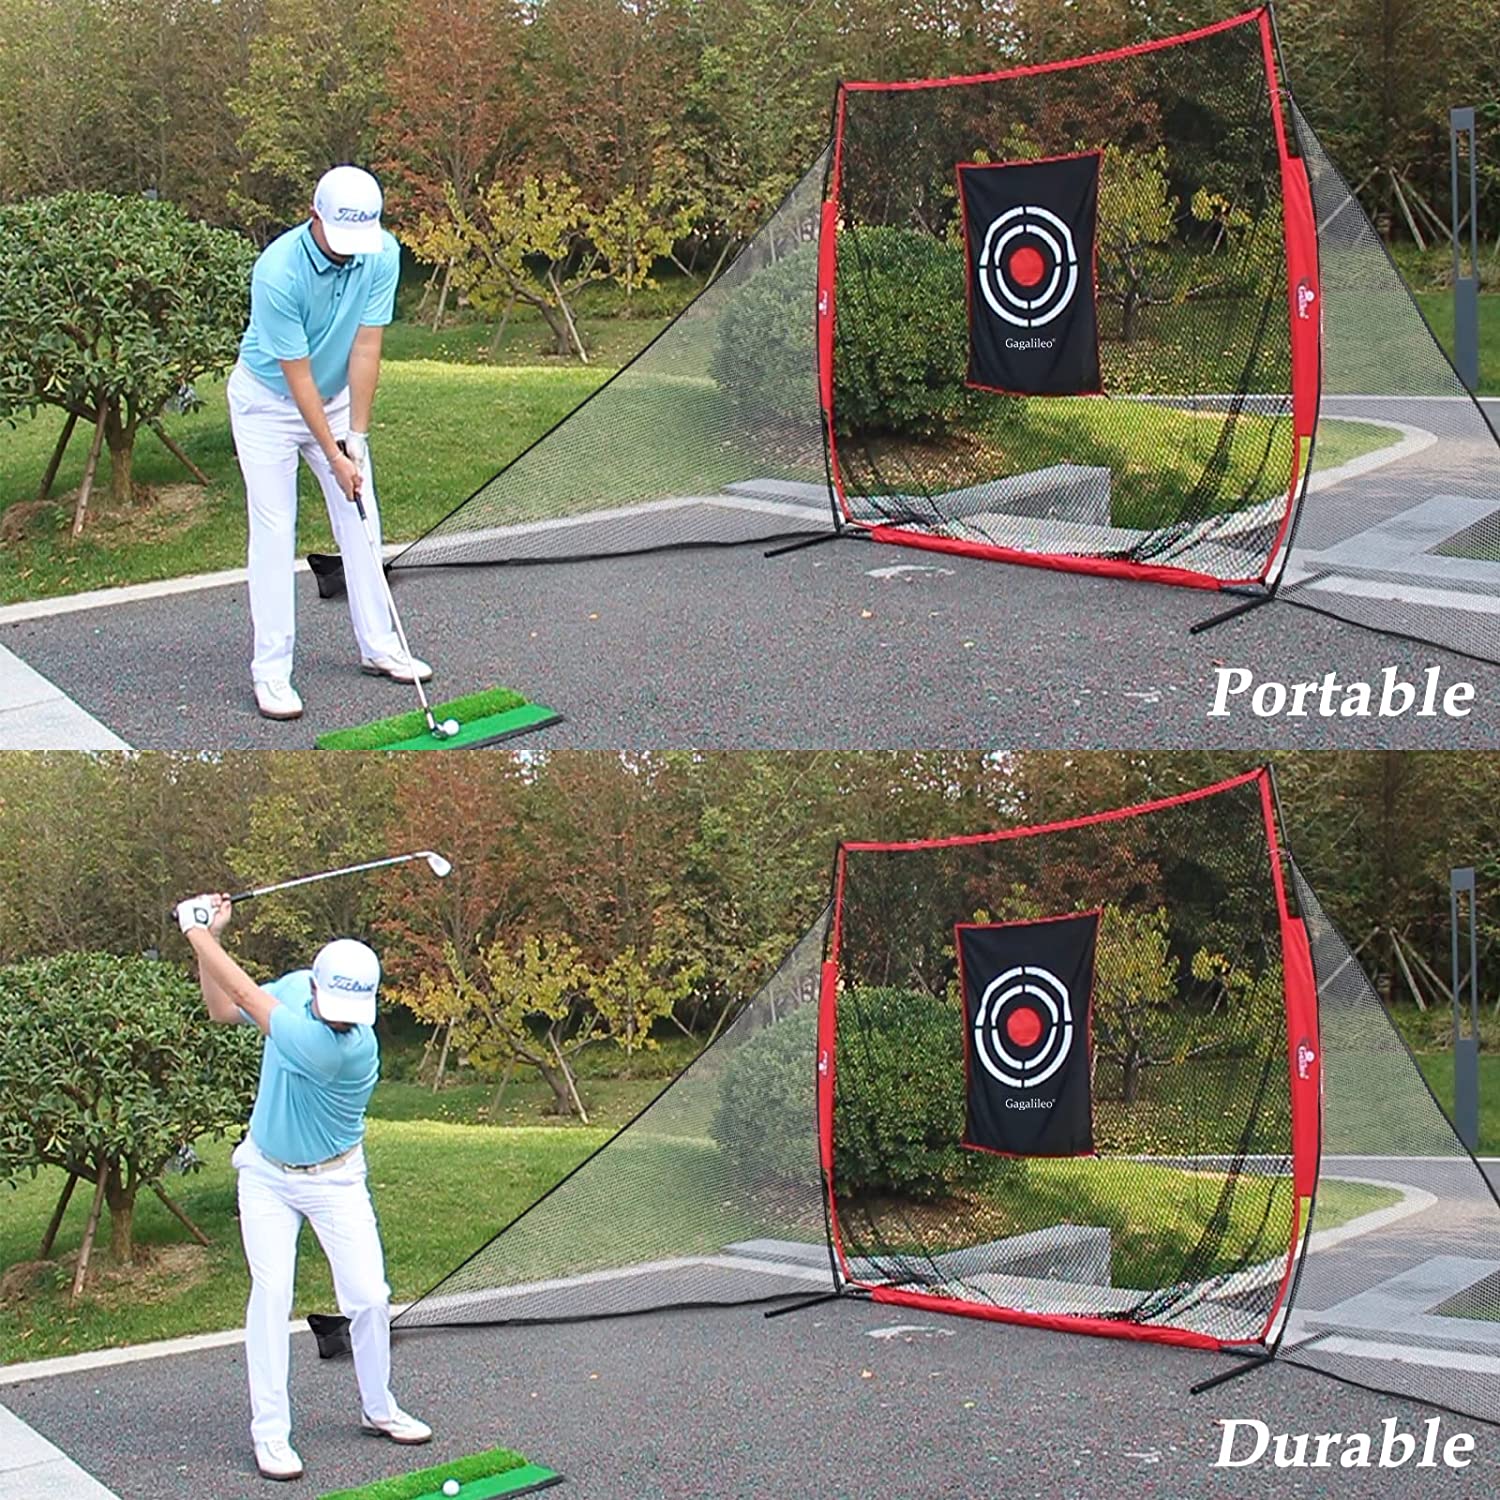 8.5x6in Golf Barrier Net with 2 Packs/ Triangle Side Wings